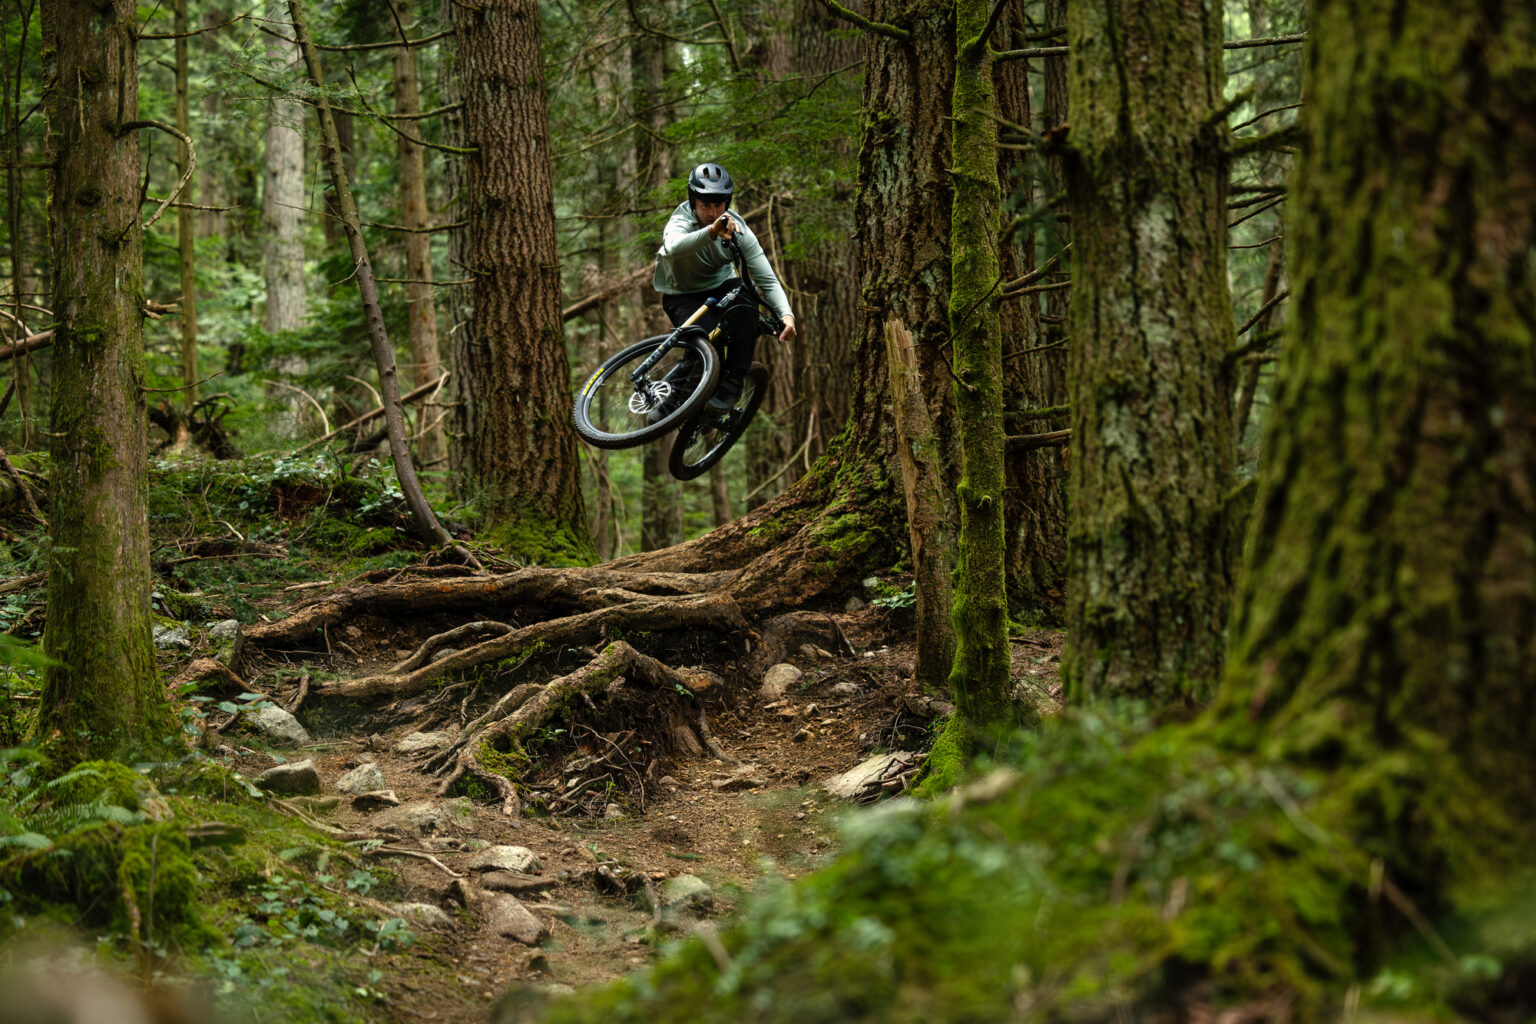 Warren Kniss jumping over roots and rocks on the new Yeti SB165